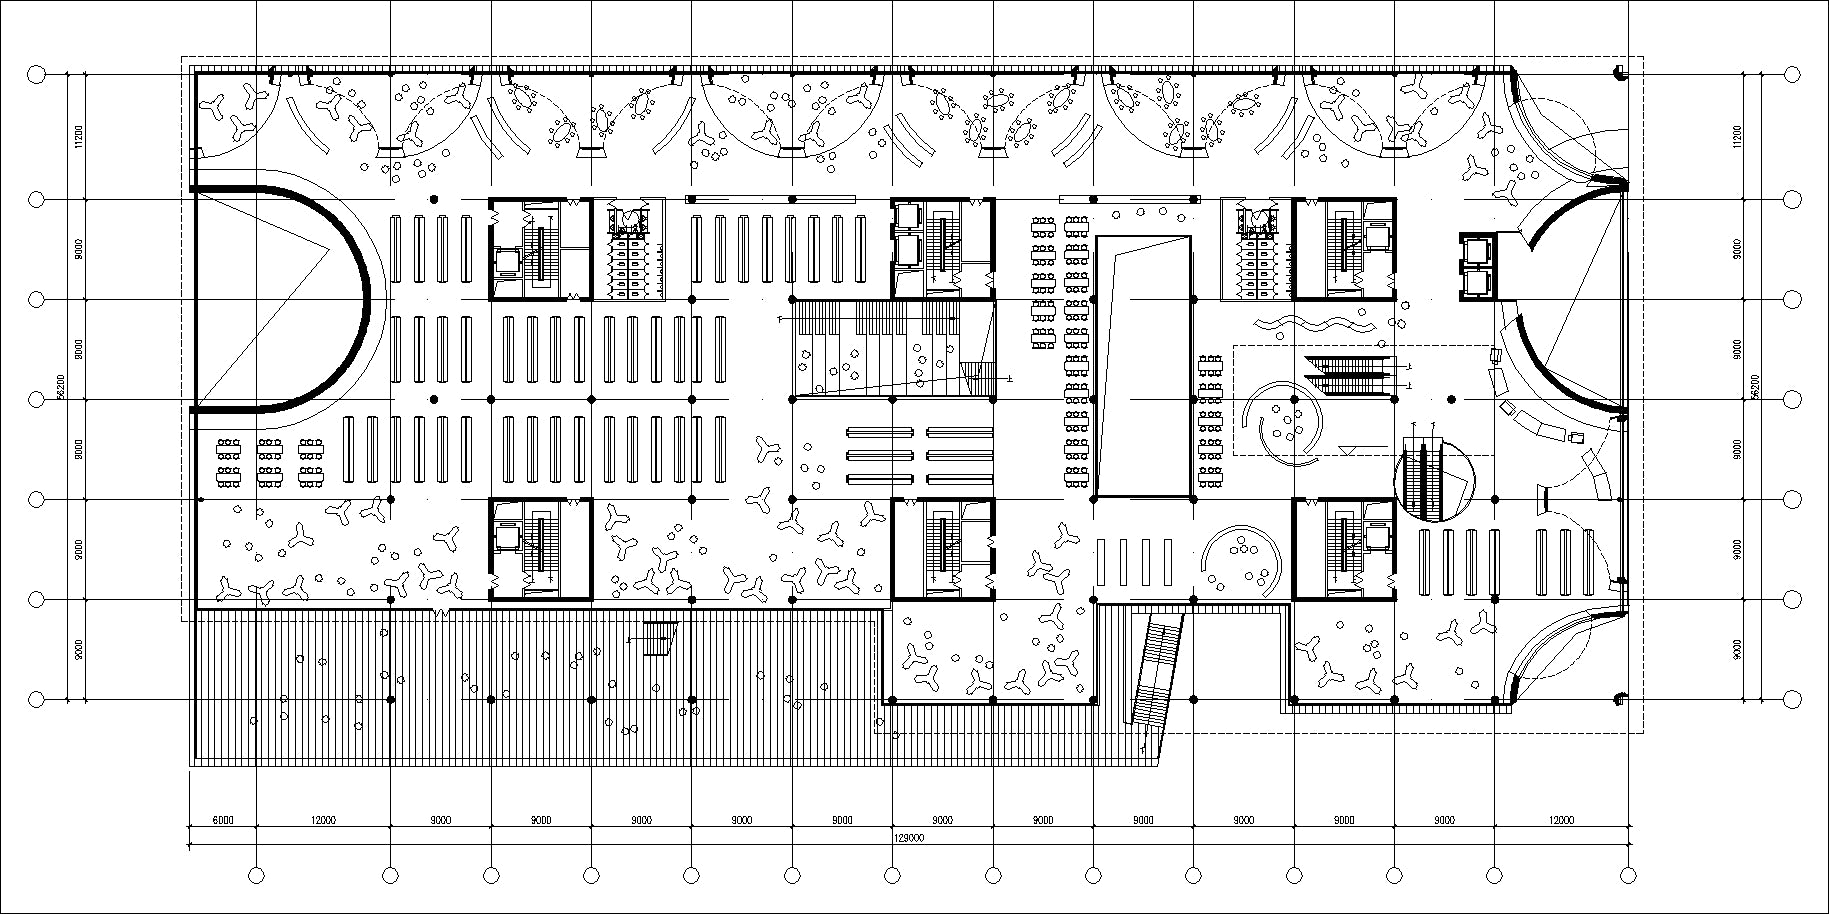 【Architecture CAD Projects】Library Design CAD Blocks,Plans,Layout V1